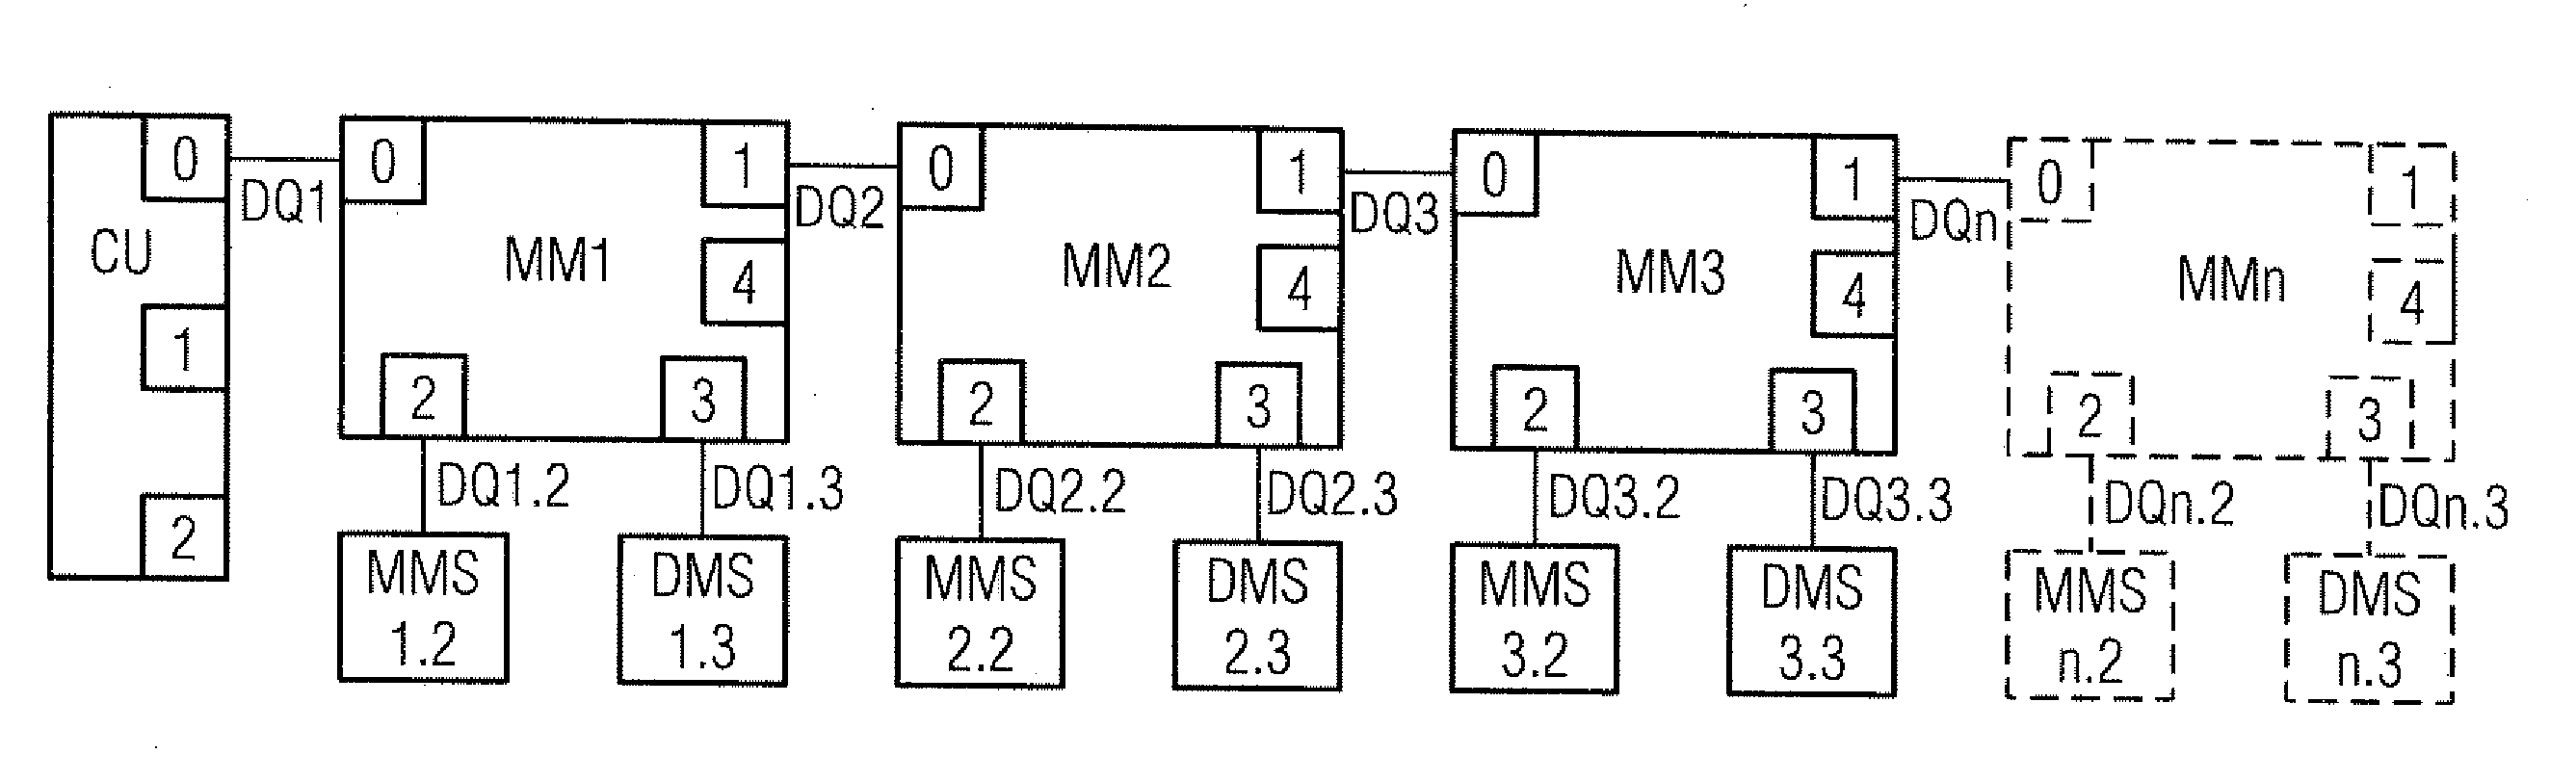 Production machine or machine tool and method for operating a production machine or machine tool